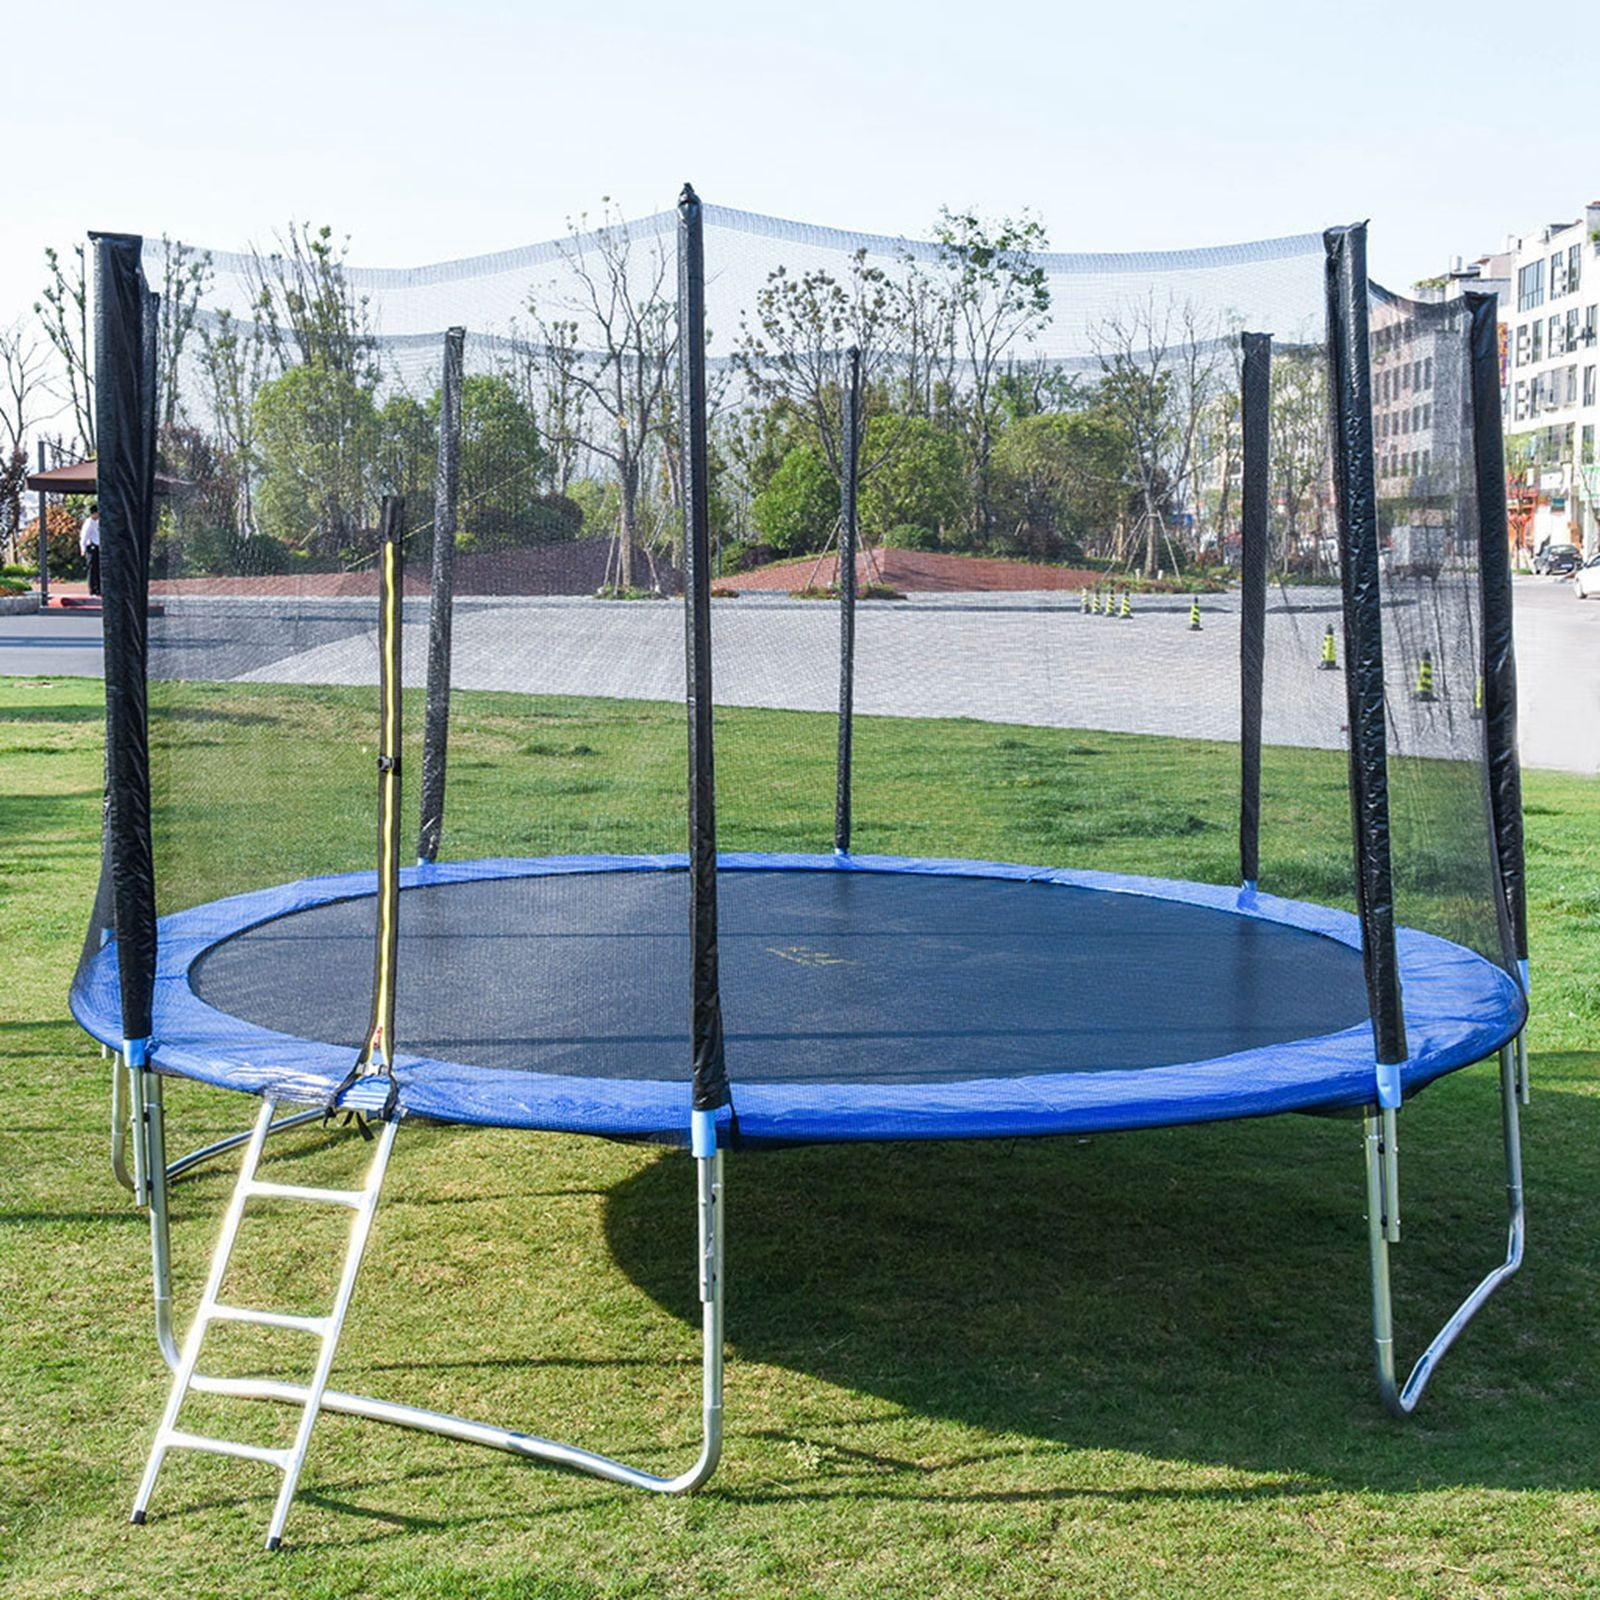 10 FT Kids Trampoline With Enclosure Net Jumping Mat And Spring Cover Padding 